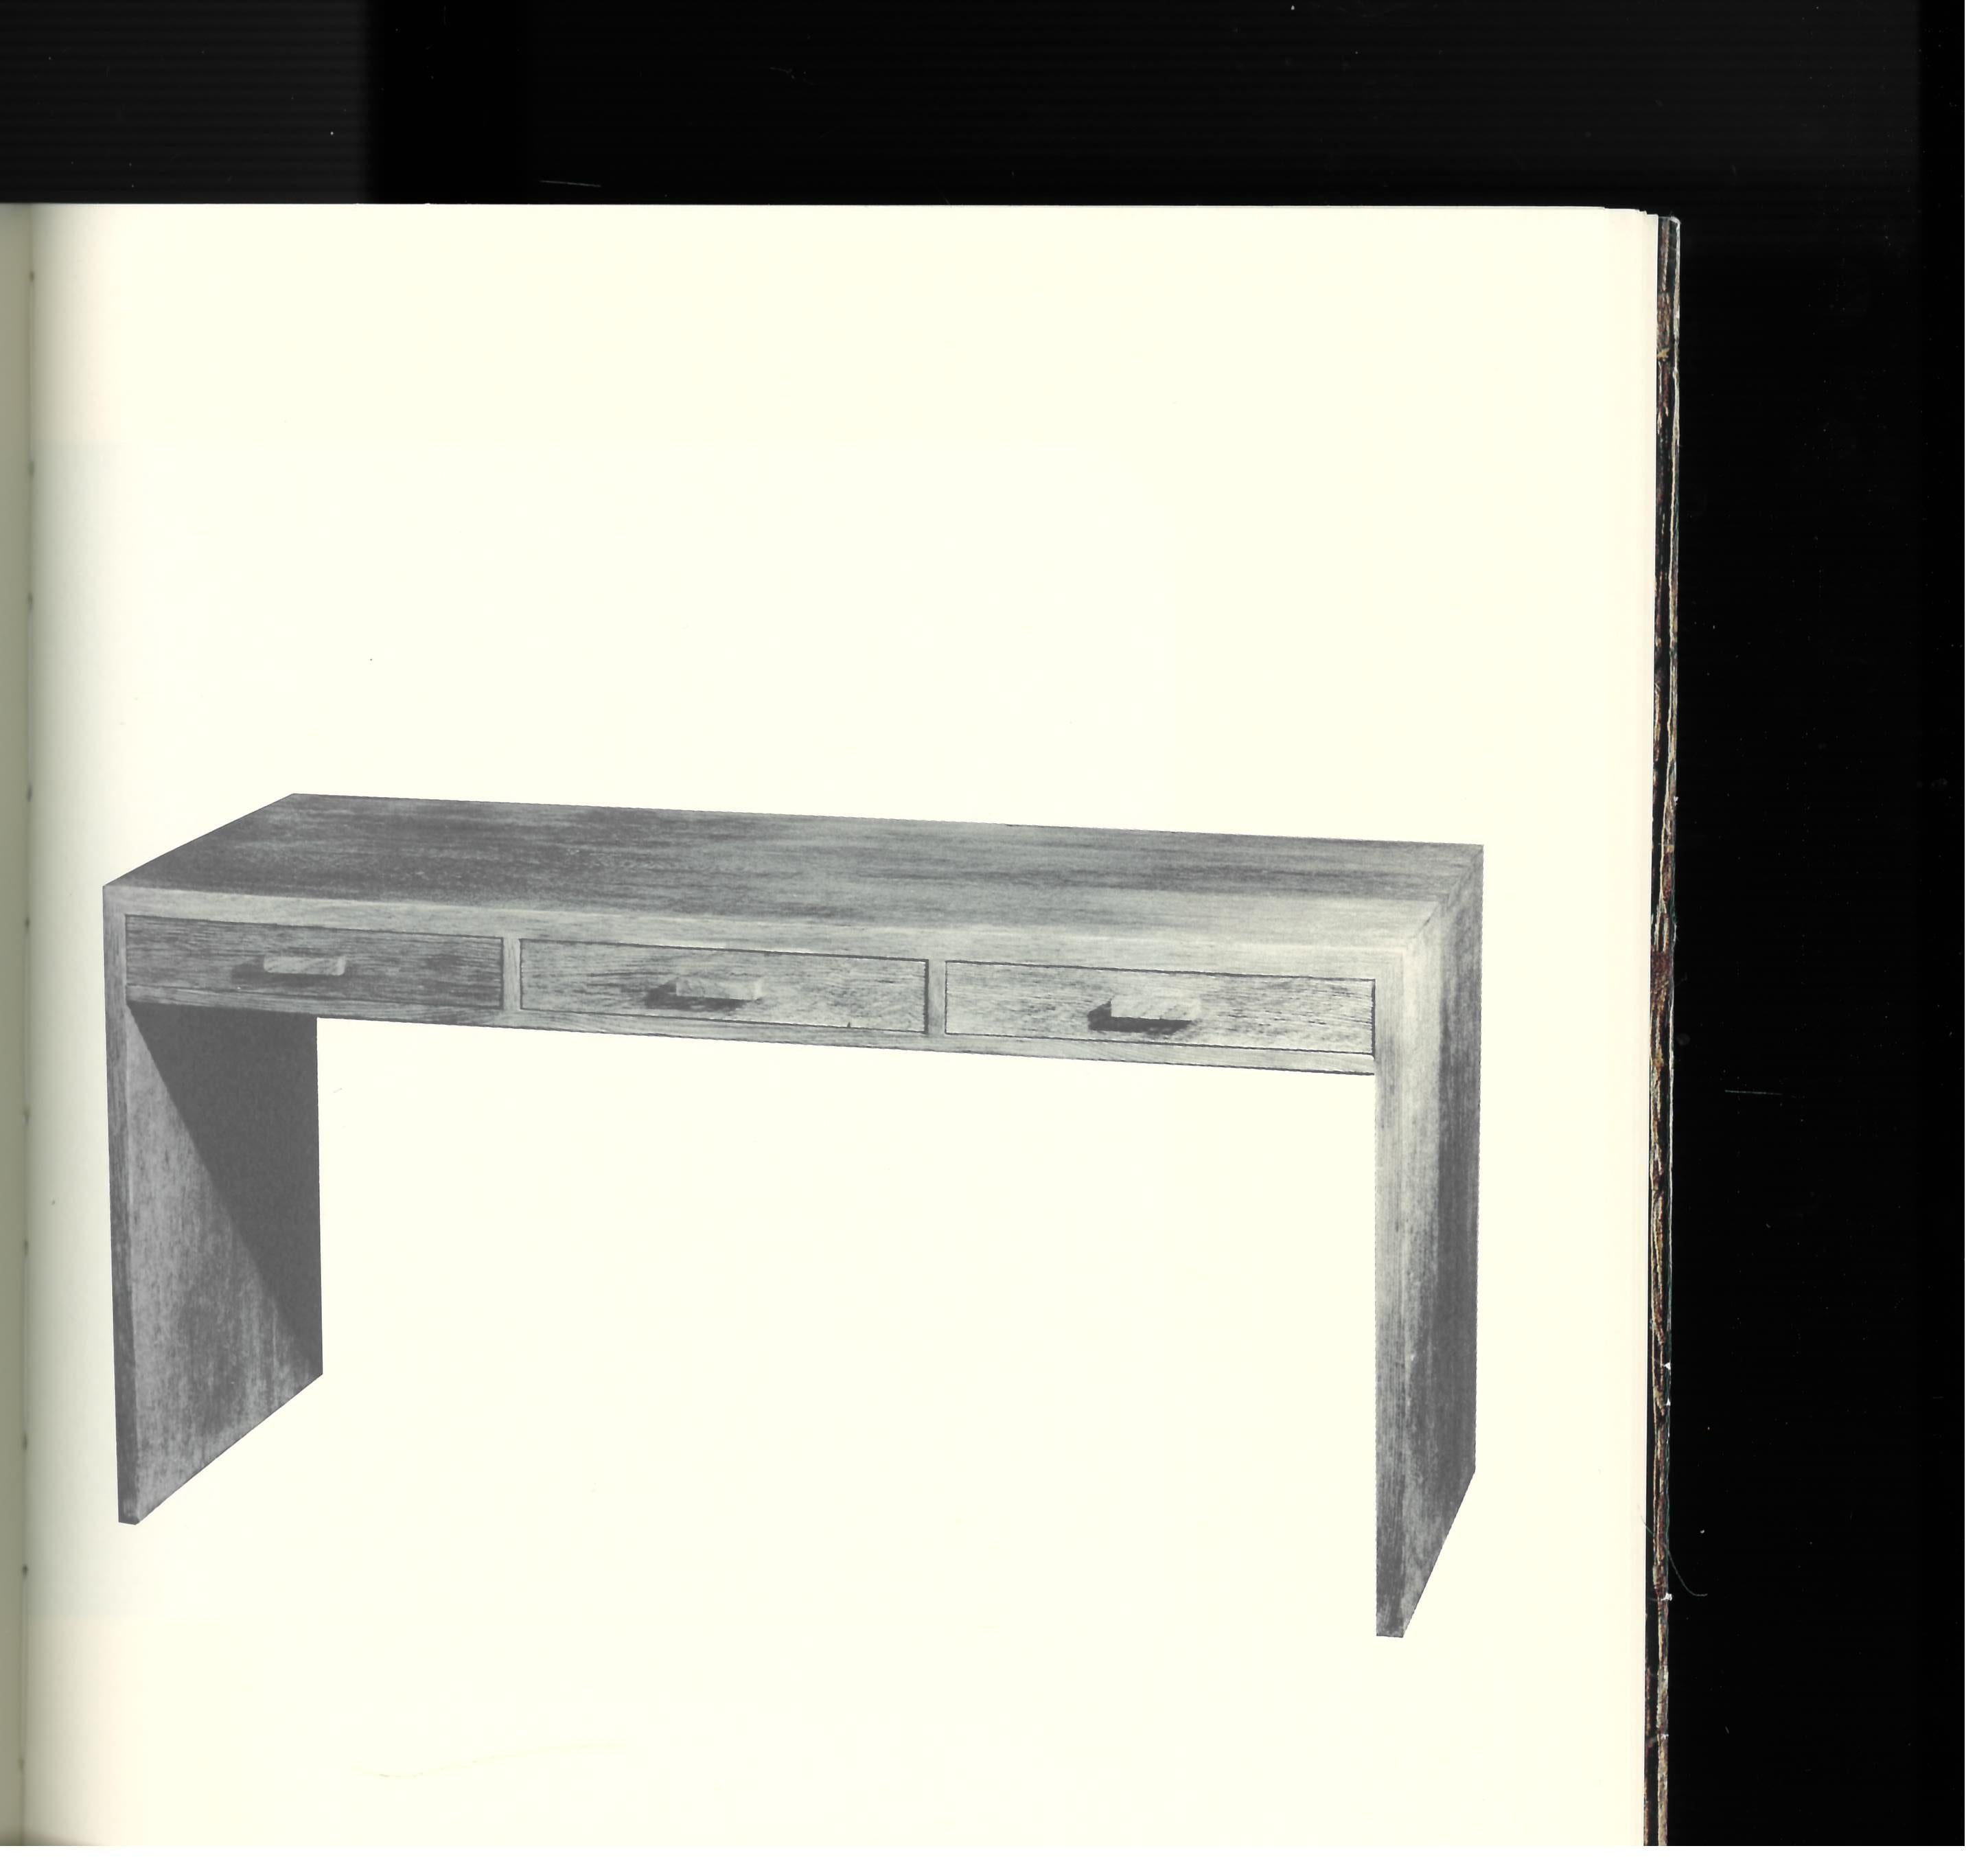 This is a catalogue produced by Galerie Jacques de Vos in 1988 for an exhibition that they held of furniture which was in various private collections, so it was rarely seen by the public but all by the much sought after designer Jean-Michel Frank.